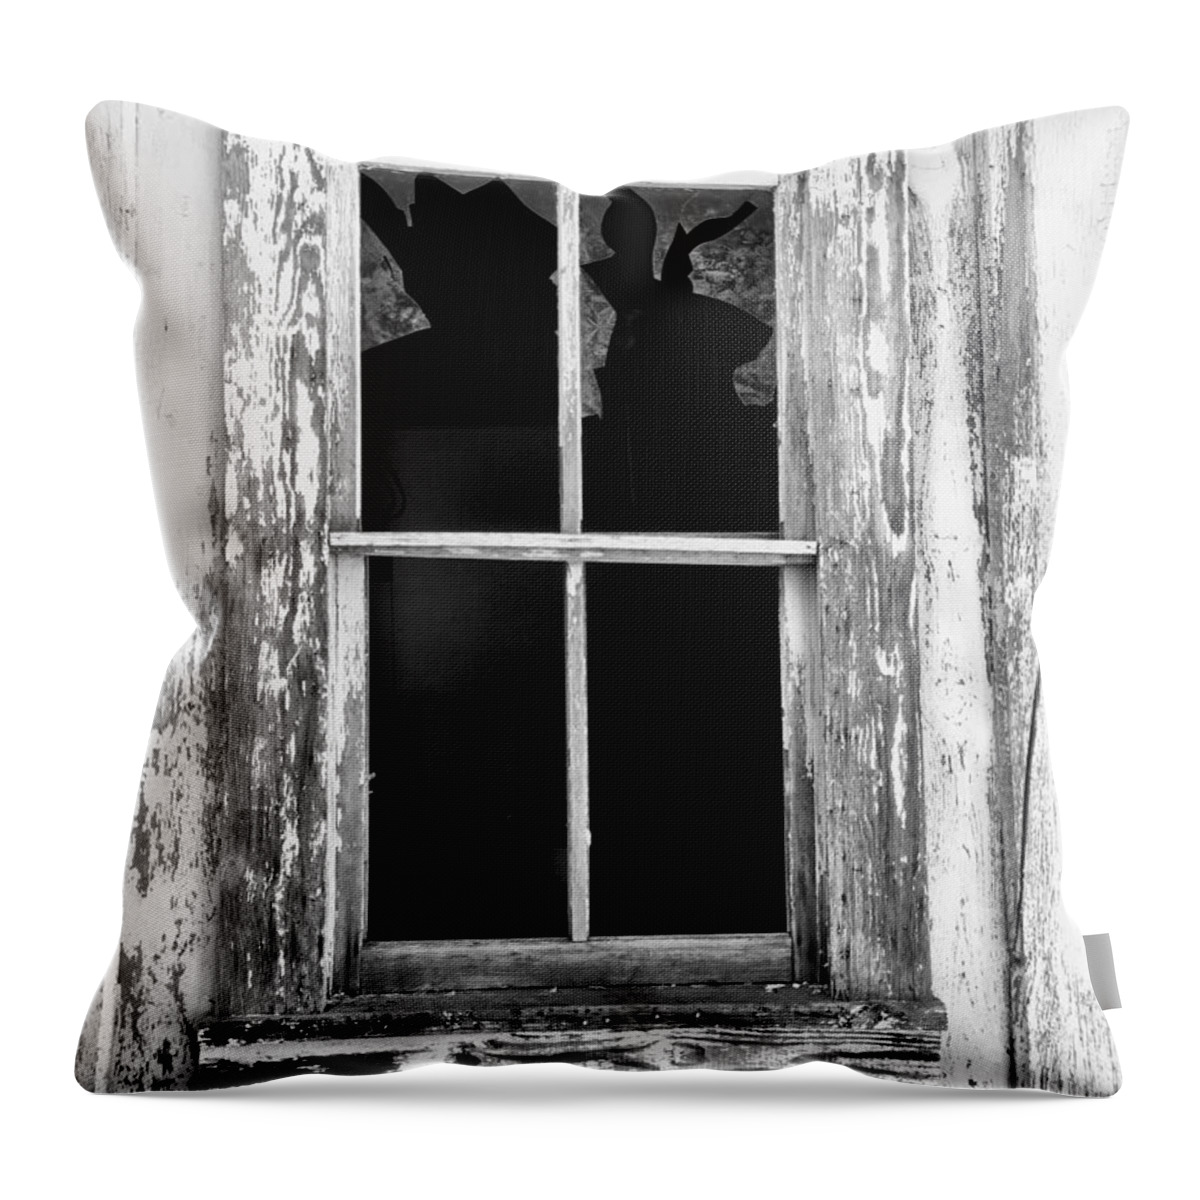 Broken Glass Throw Pillow featuring the photograph Imagination by Brad Hodges